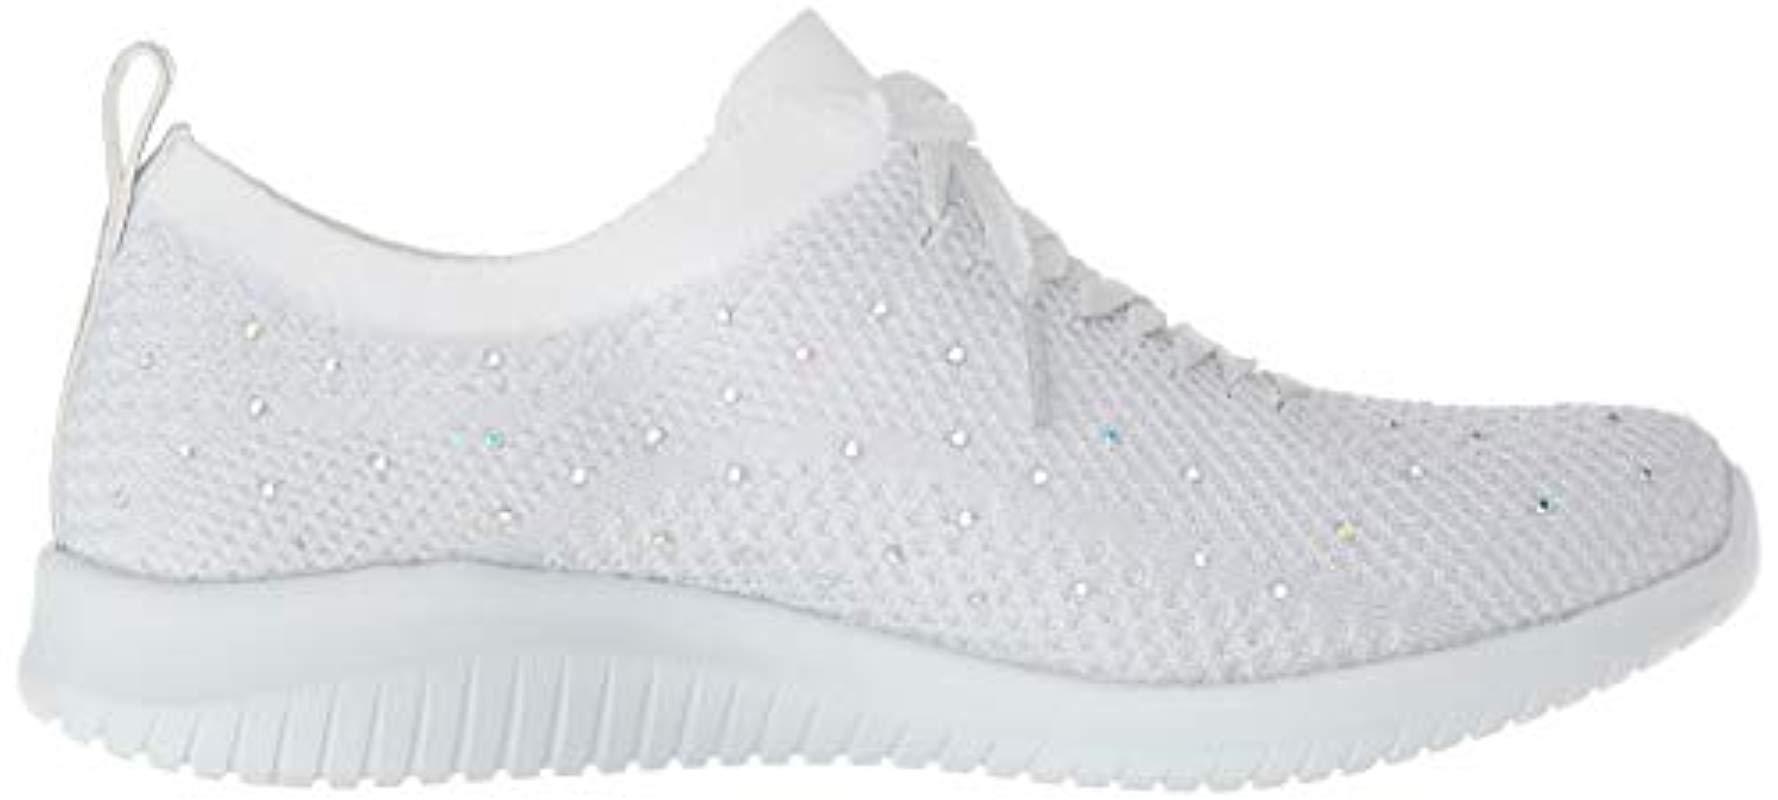 Skechers 's Flex-strolling Out Trainers in White/Silver (White) - Save 39% - Lyst